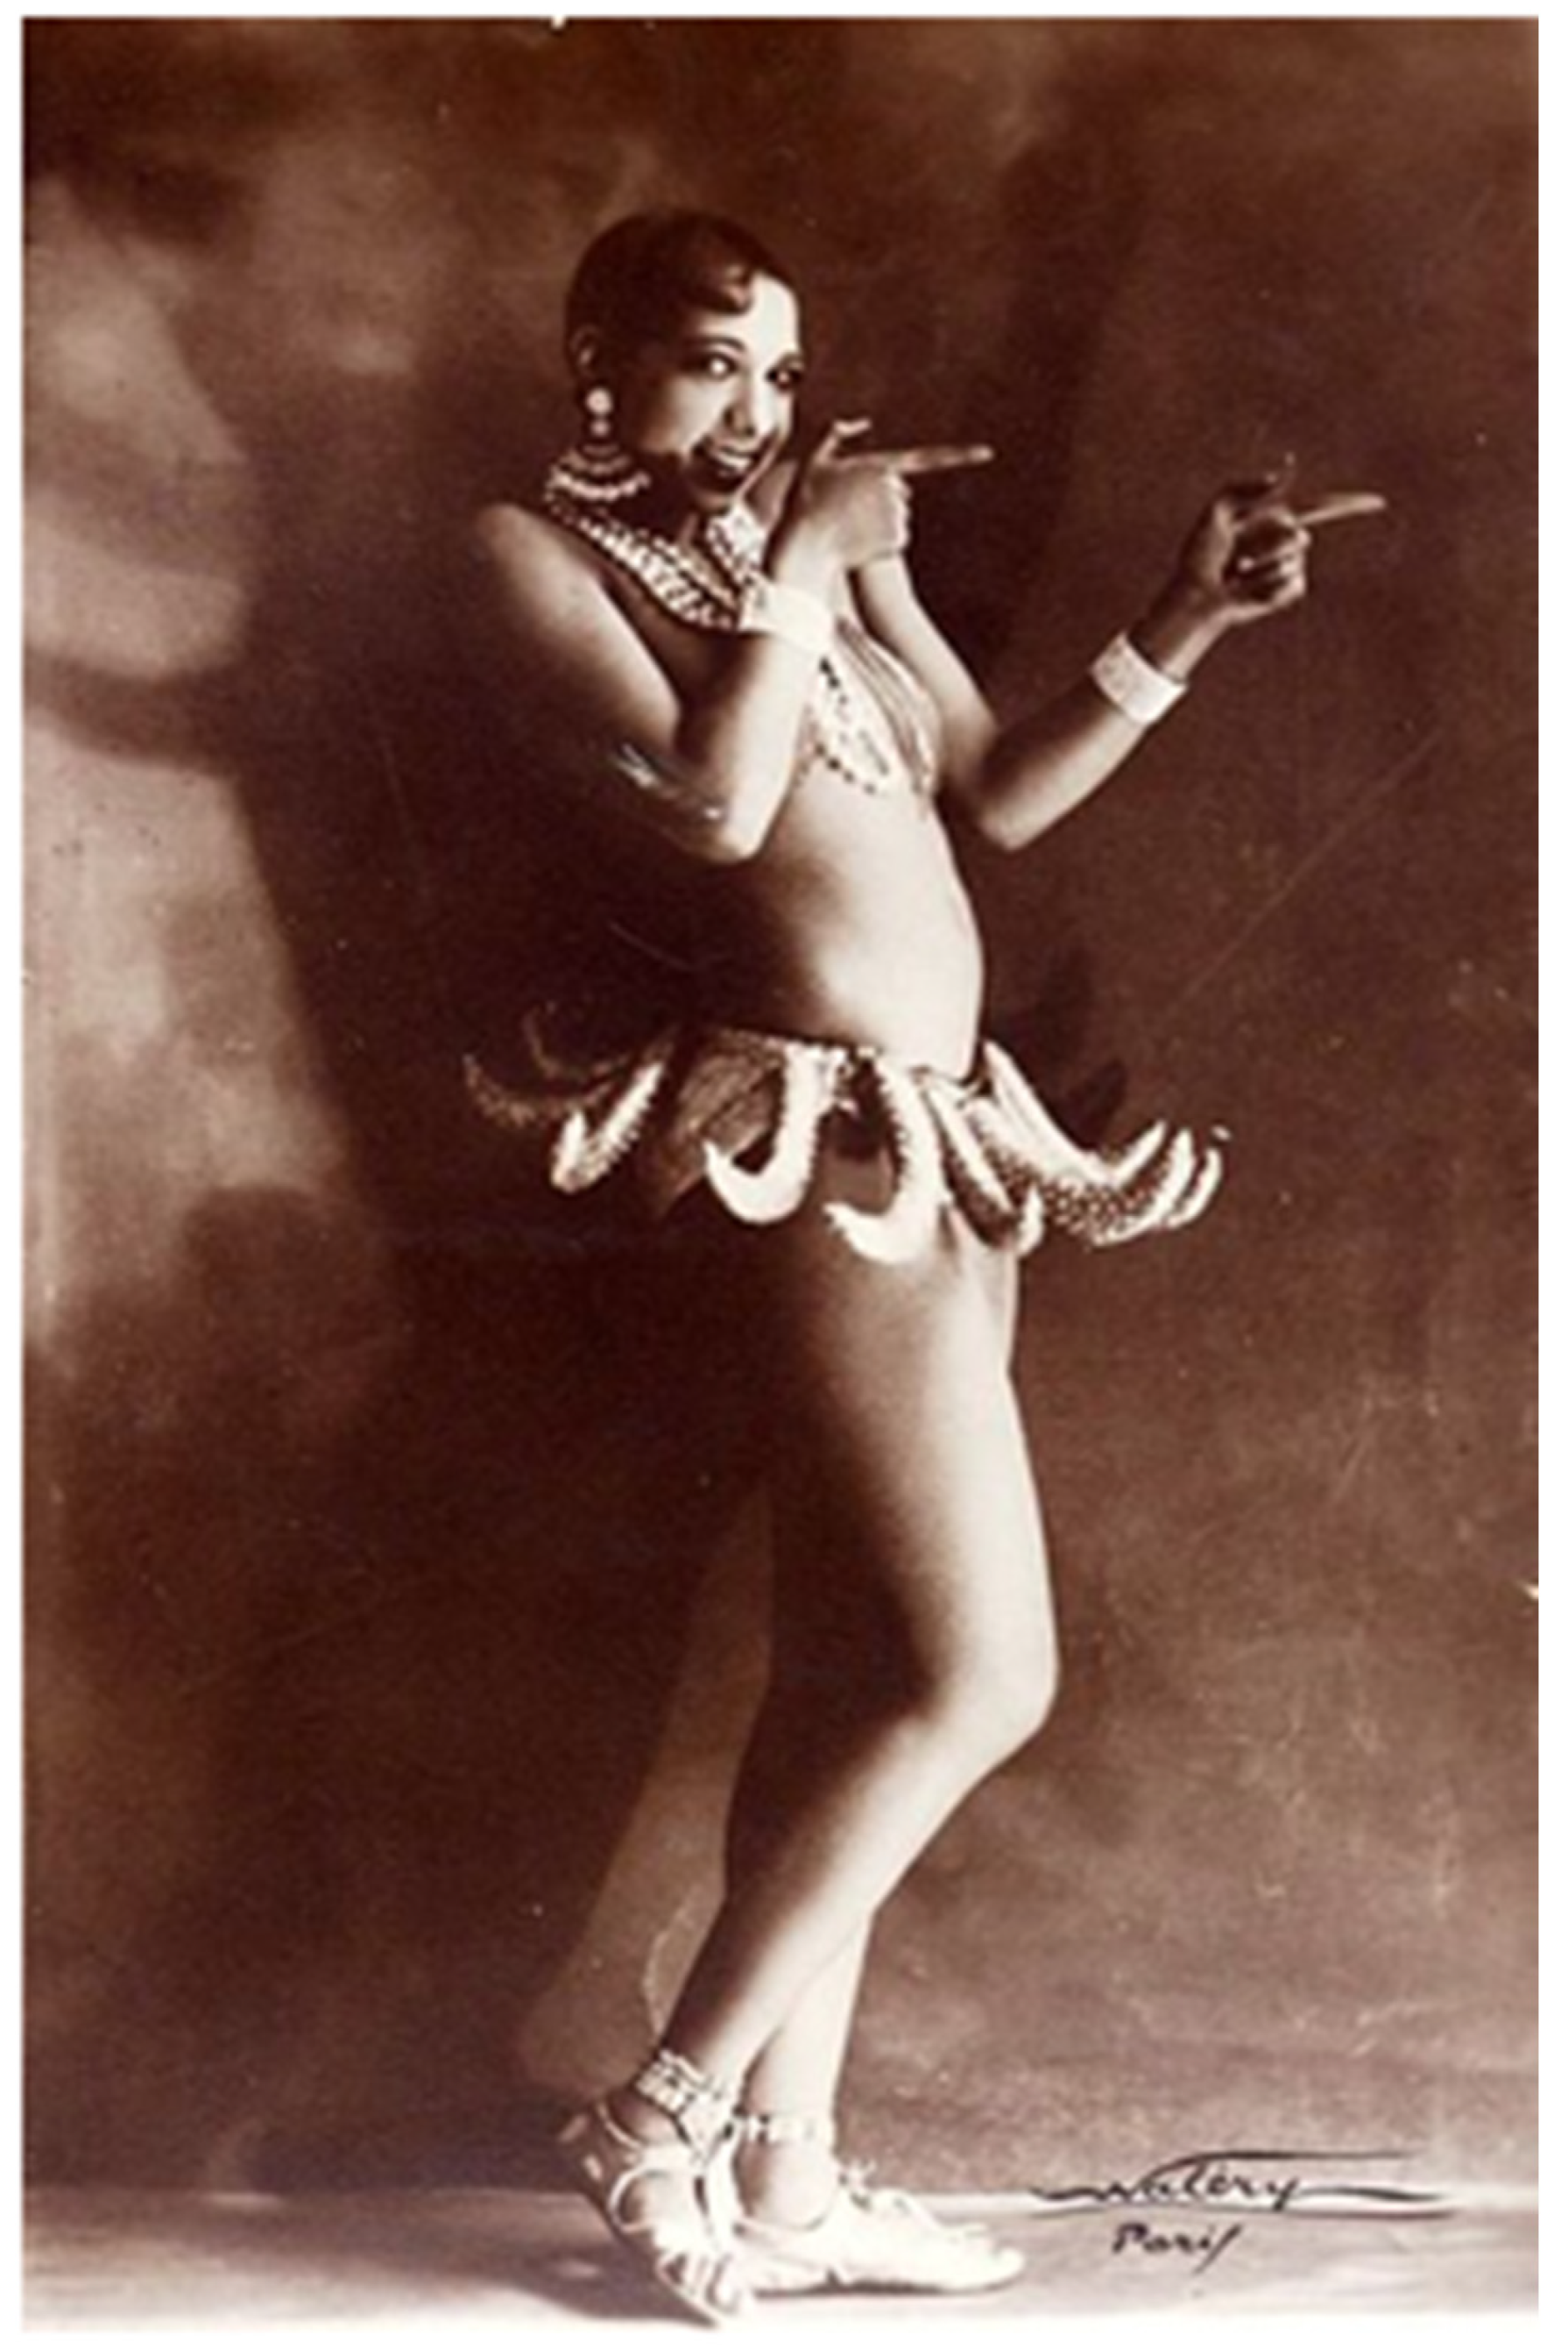 Nudist Camp Girls Feet - Humanities | Free Full-Text | “The Whole Ensemble”: Gwendolyn  Bennett, Josephine Baker, and Interartistic Exchange in Black American  Modernism